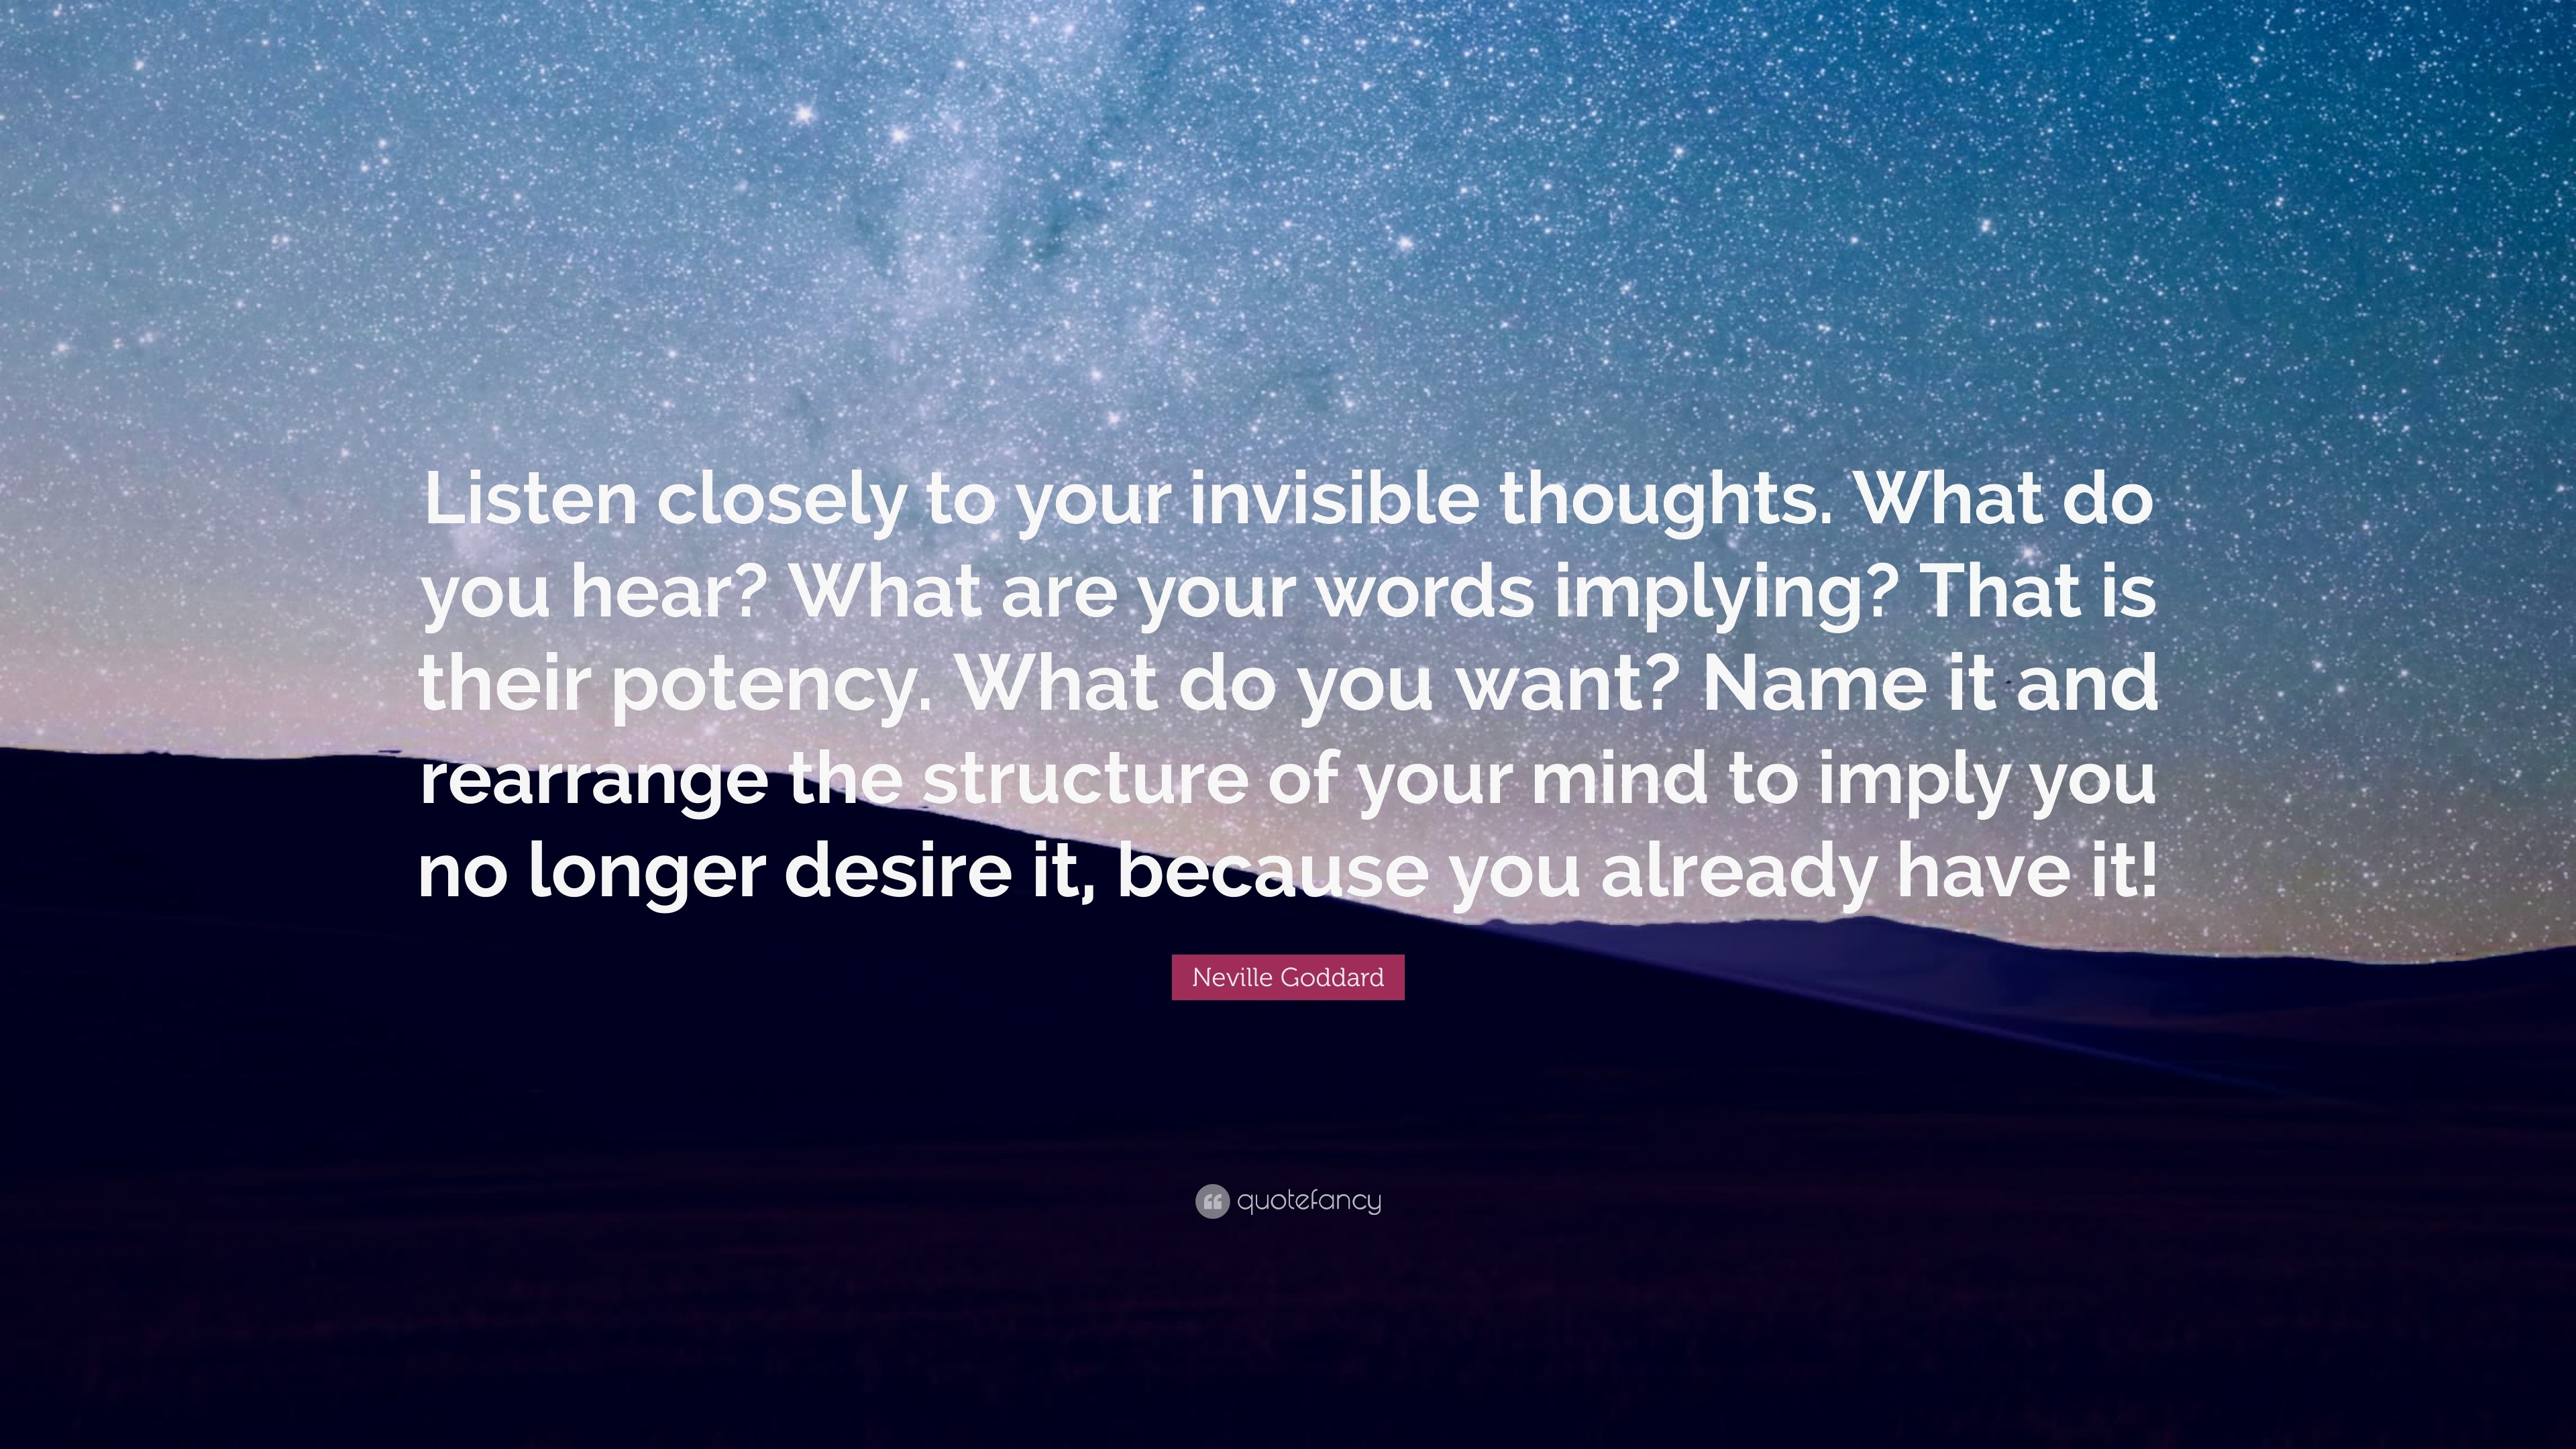 Neville Goddard Quote: “Listen closely to your invisible thoughts. What do  you hear? What are your words implying? That is their potency. What d...”